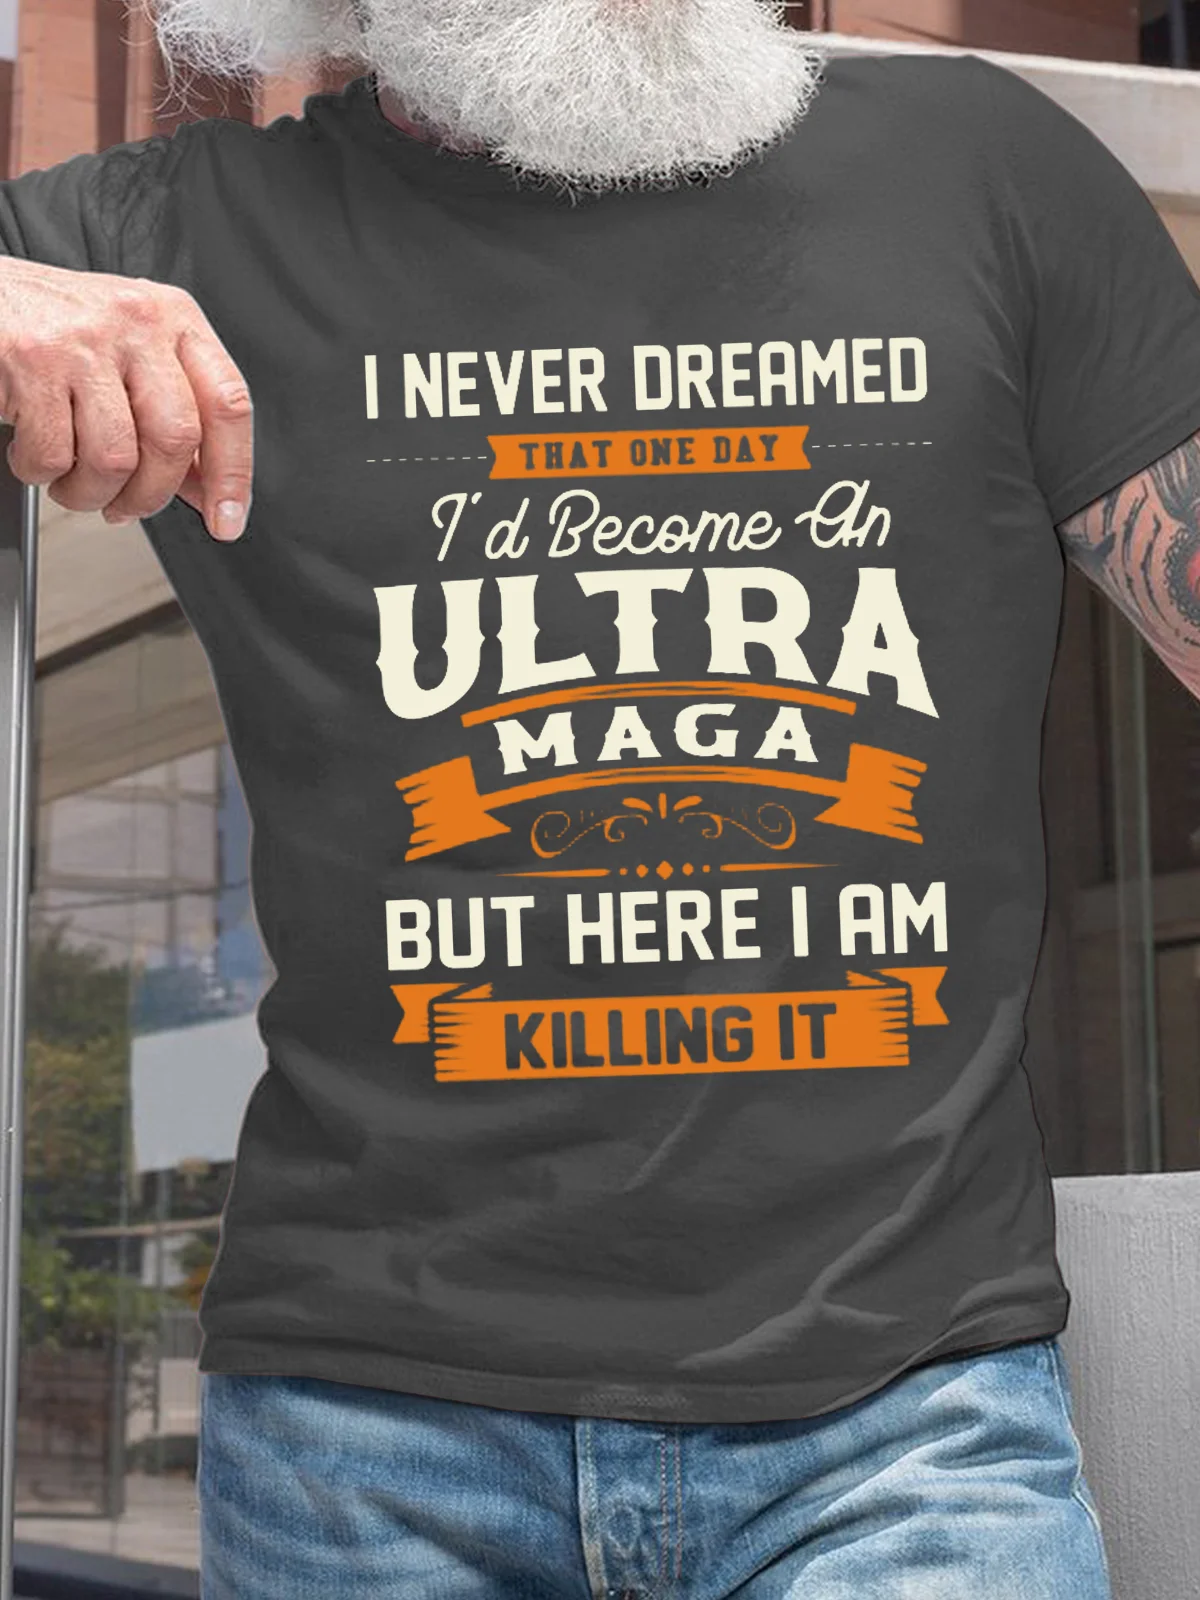 Funny Word I Never Dreamed That One Day I'd Become An Ultra MAGA But Here I Am Killing It  Cotton Casual T-Shirt